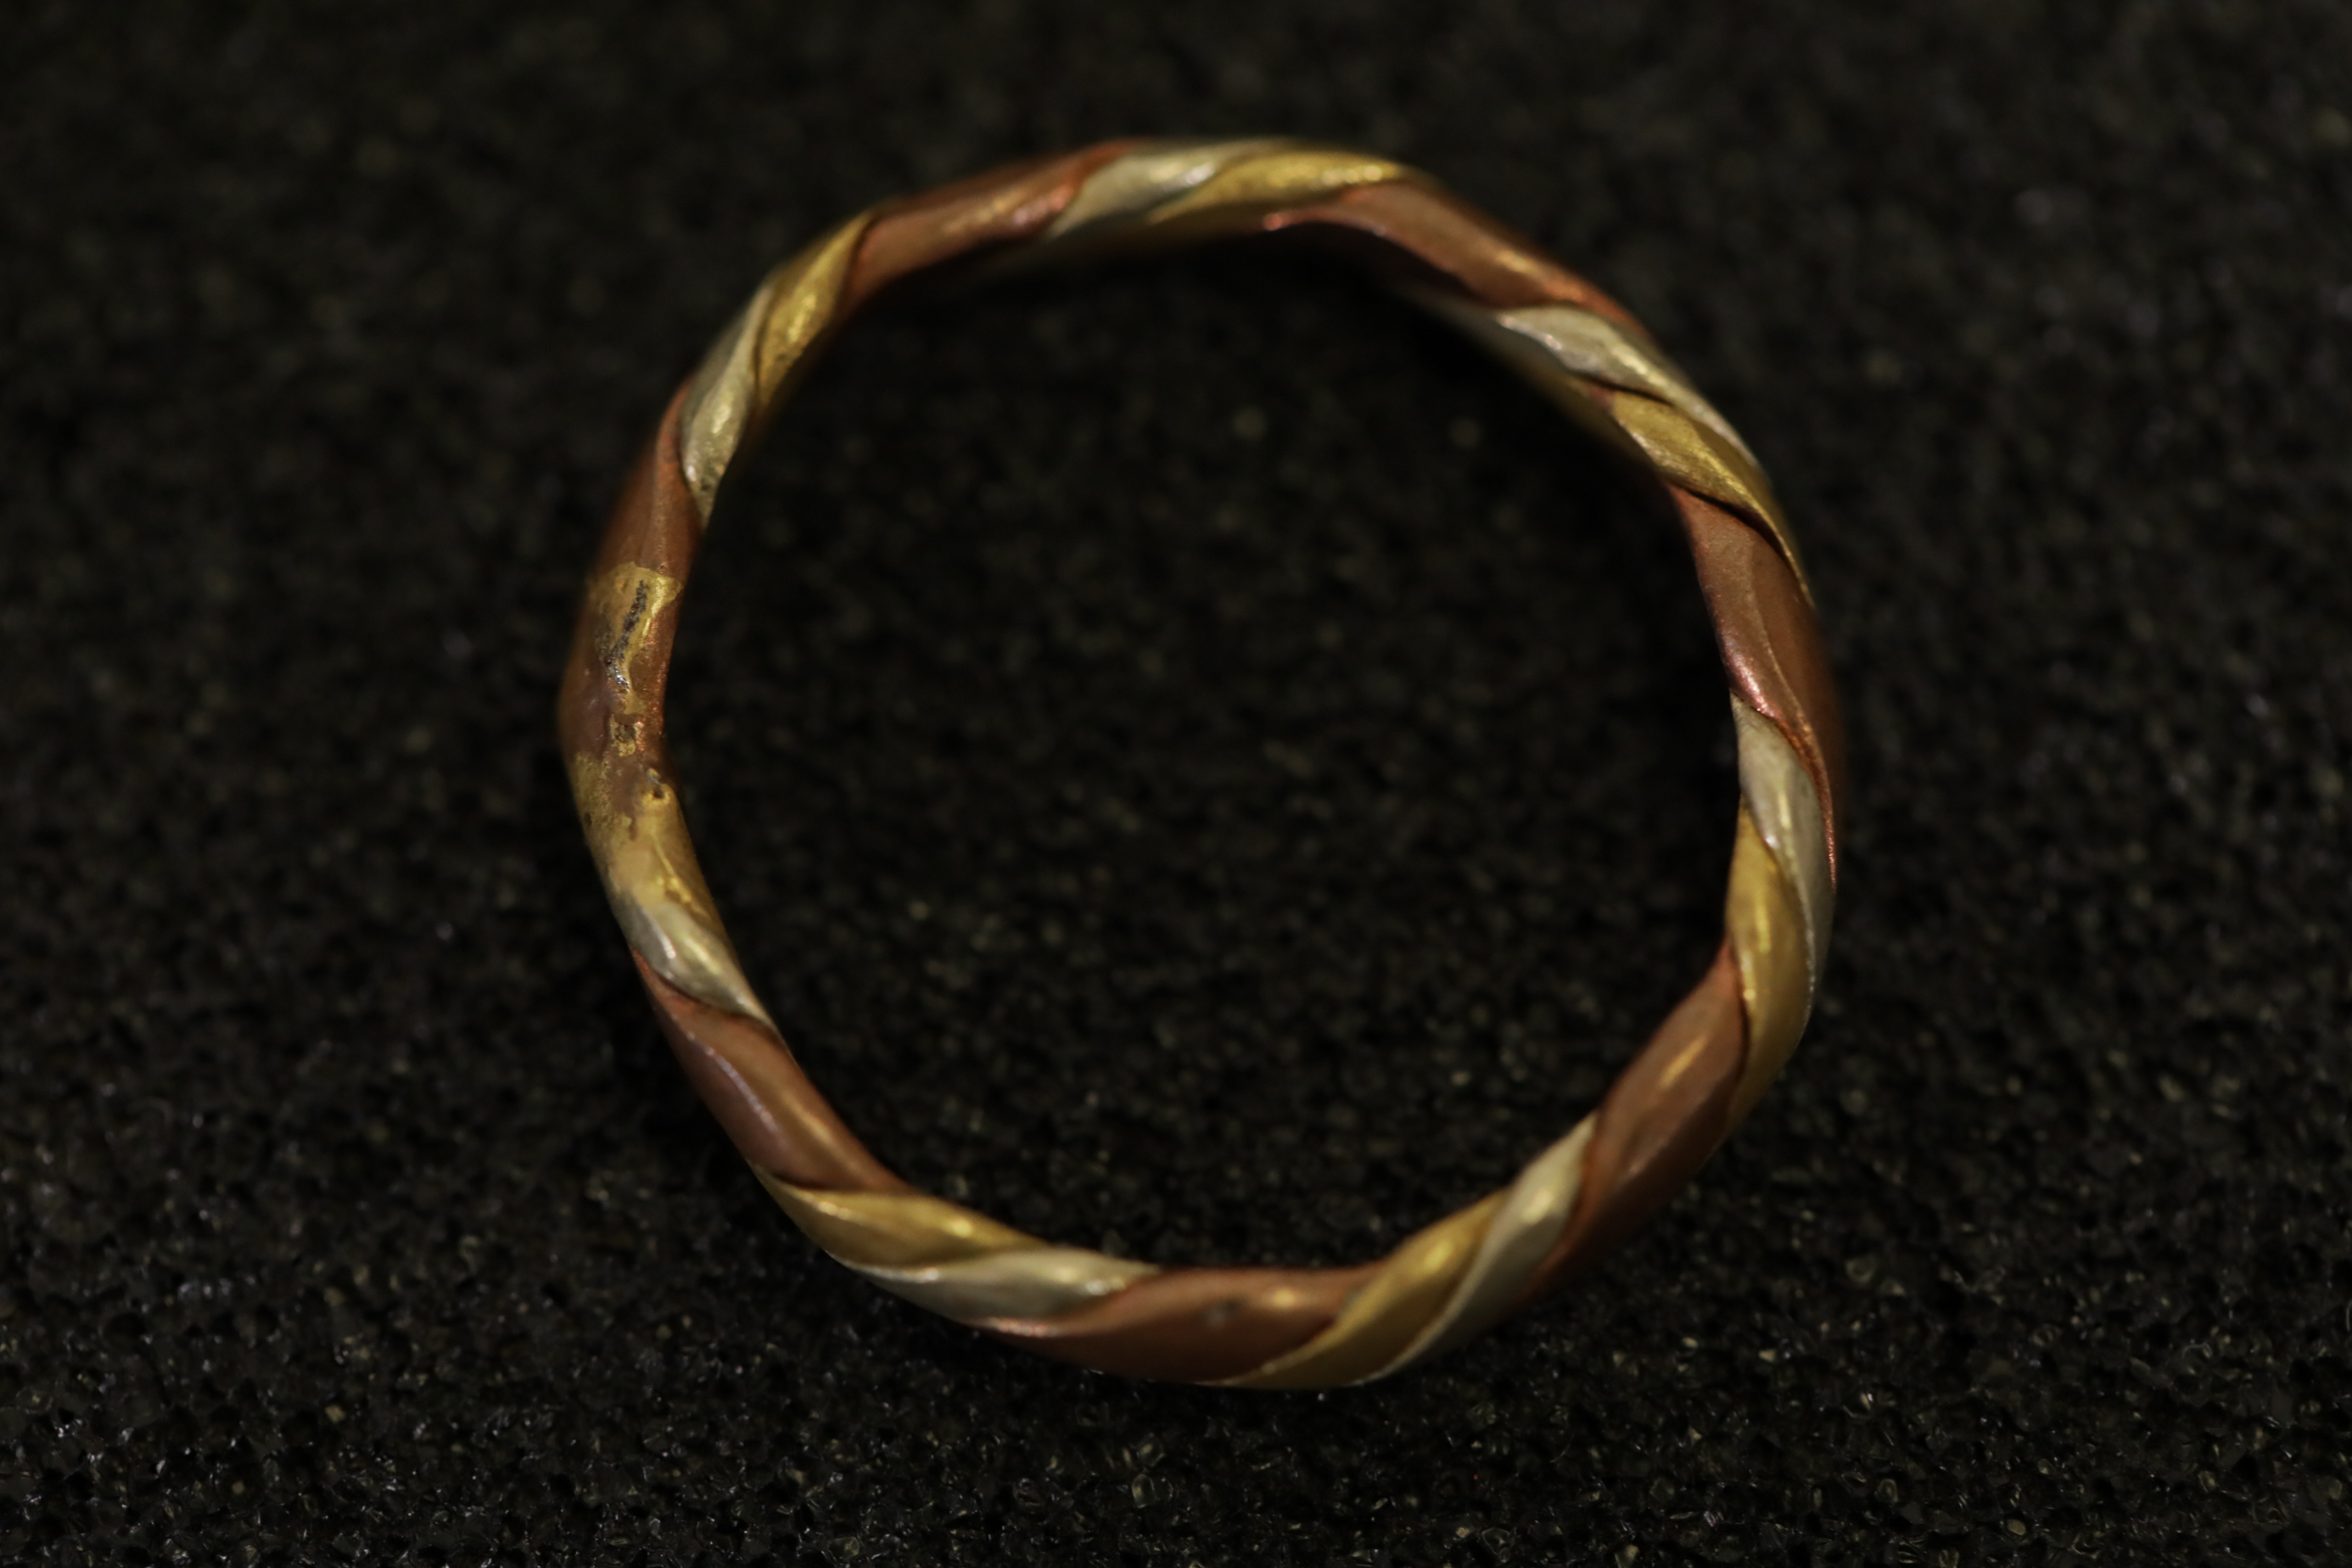 3 Metal Twist Ring of Age - Image 7 of 10